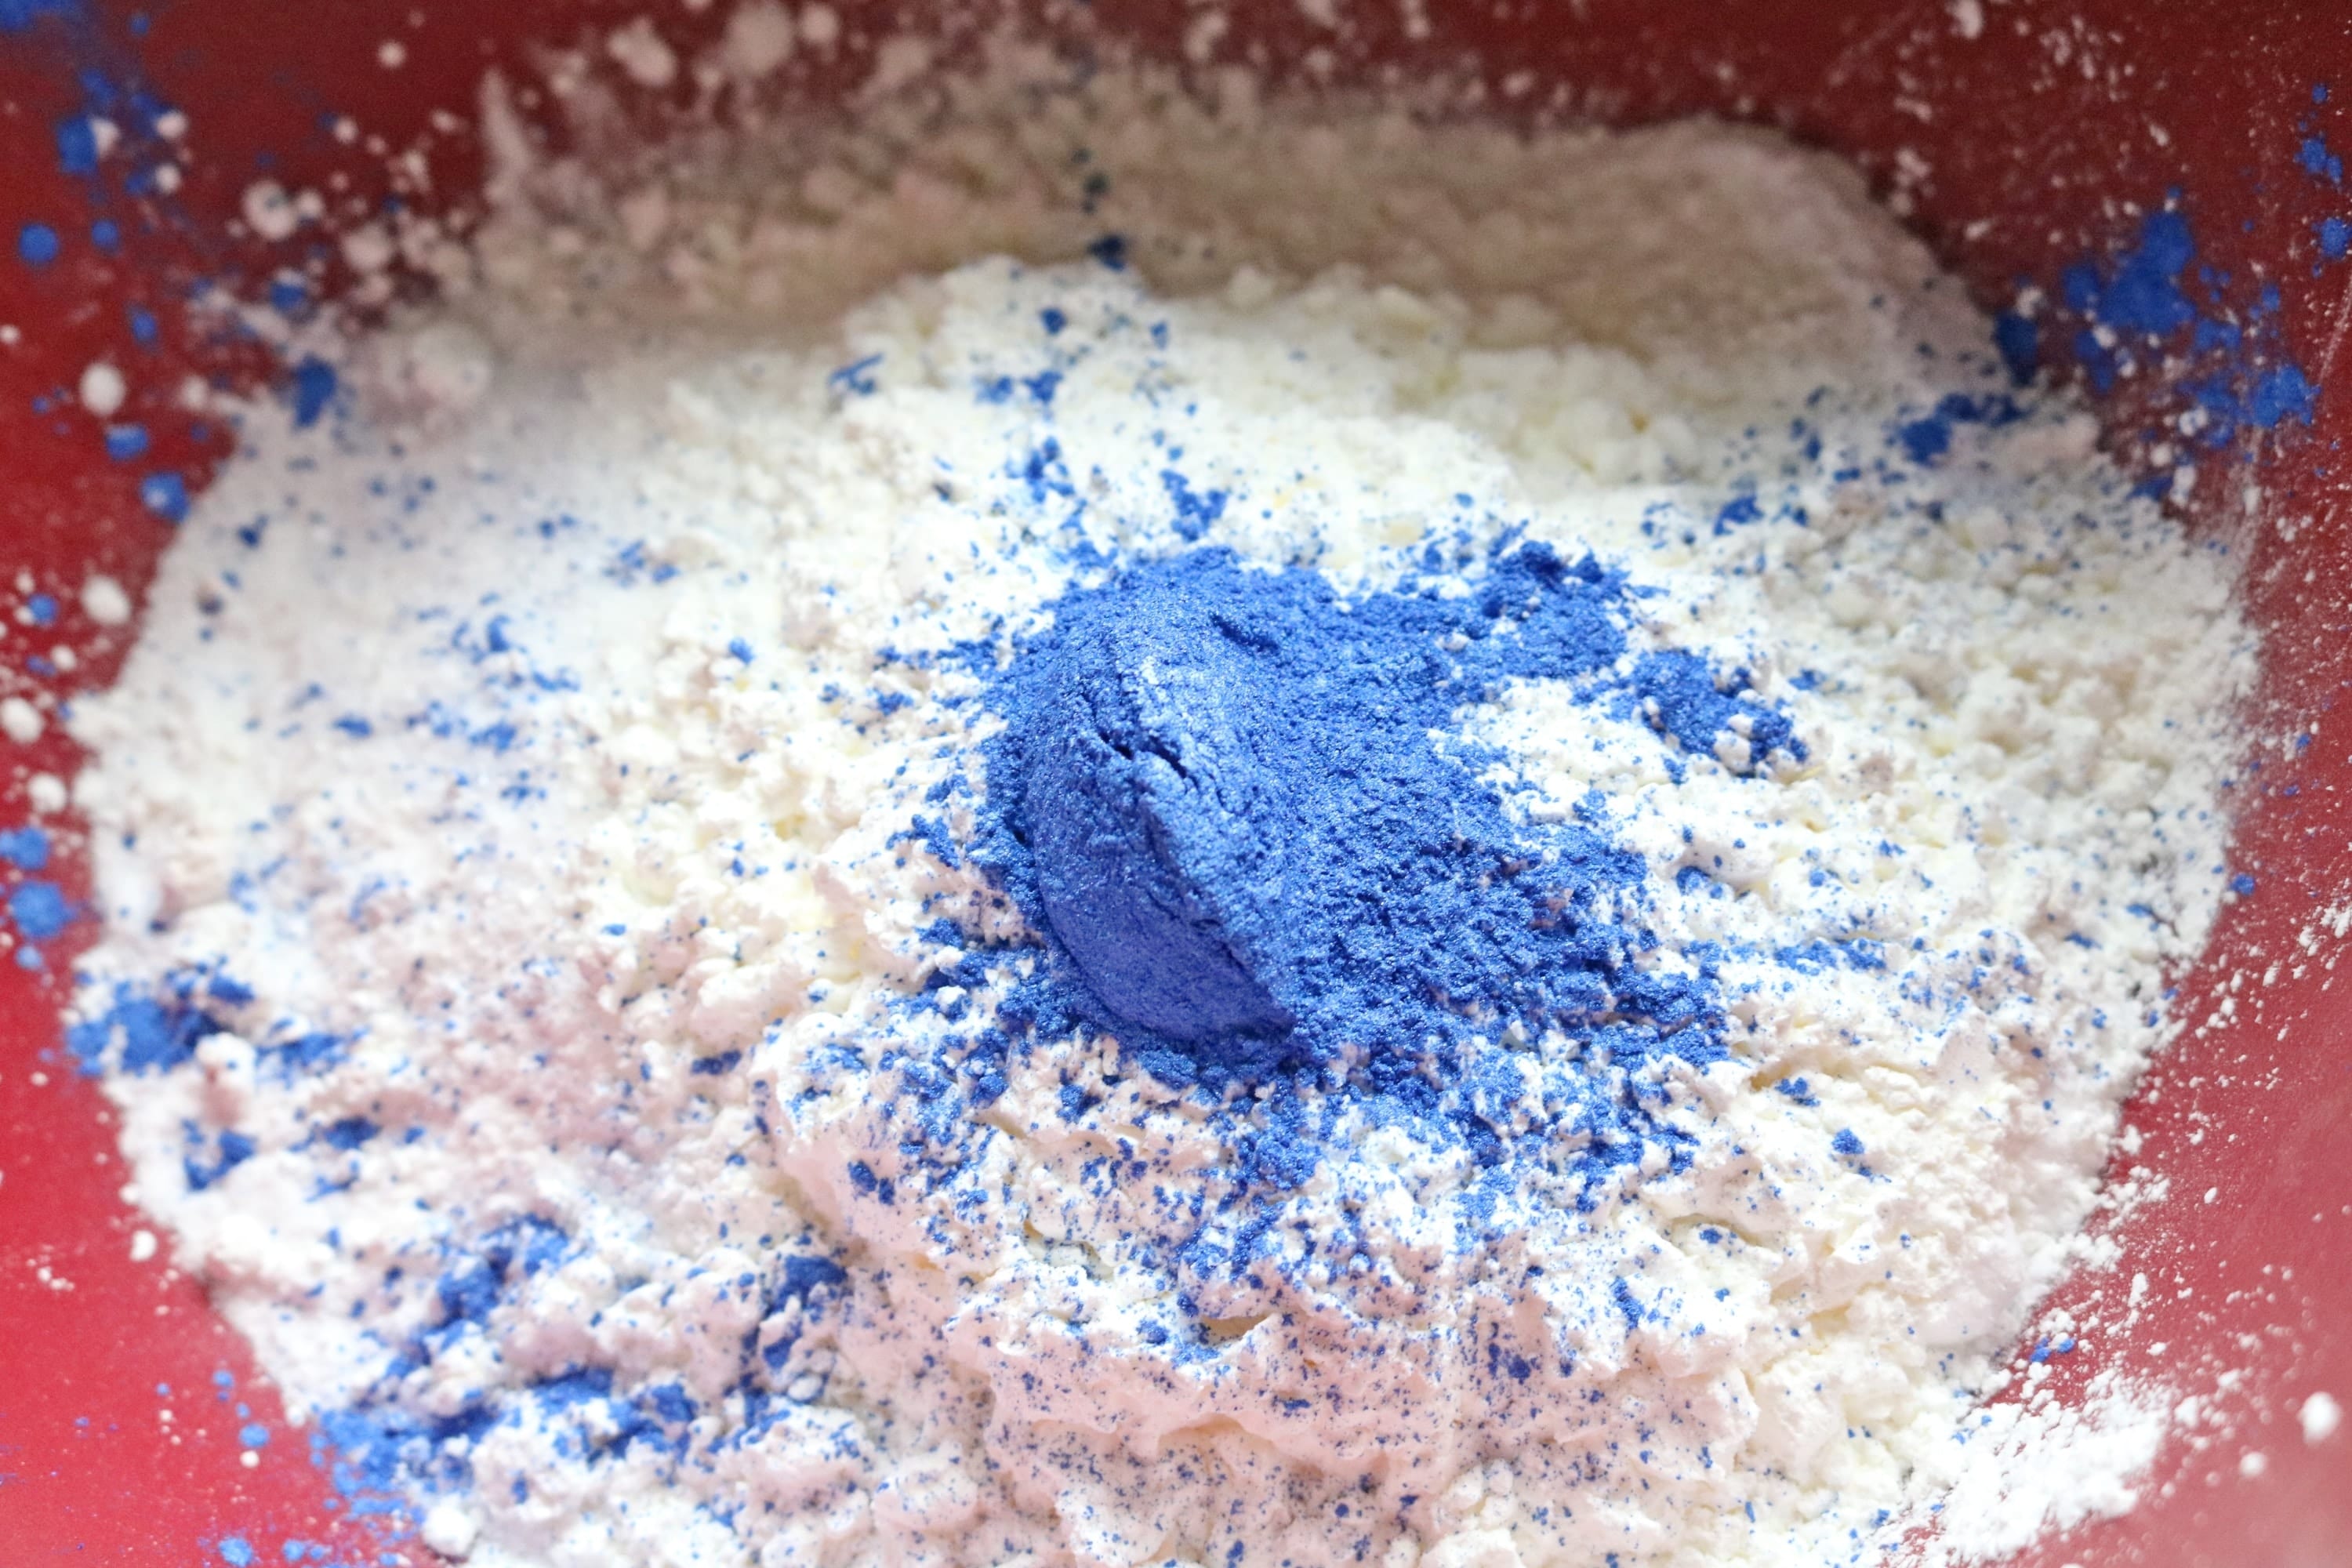 White and blue powders being mixed in a blue bowl